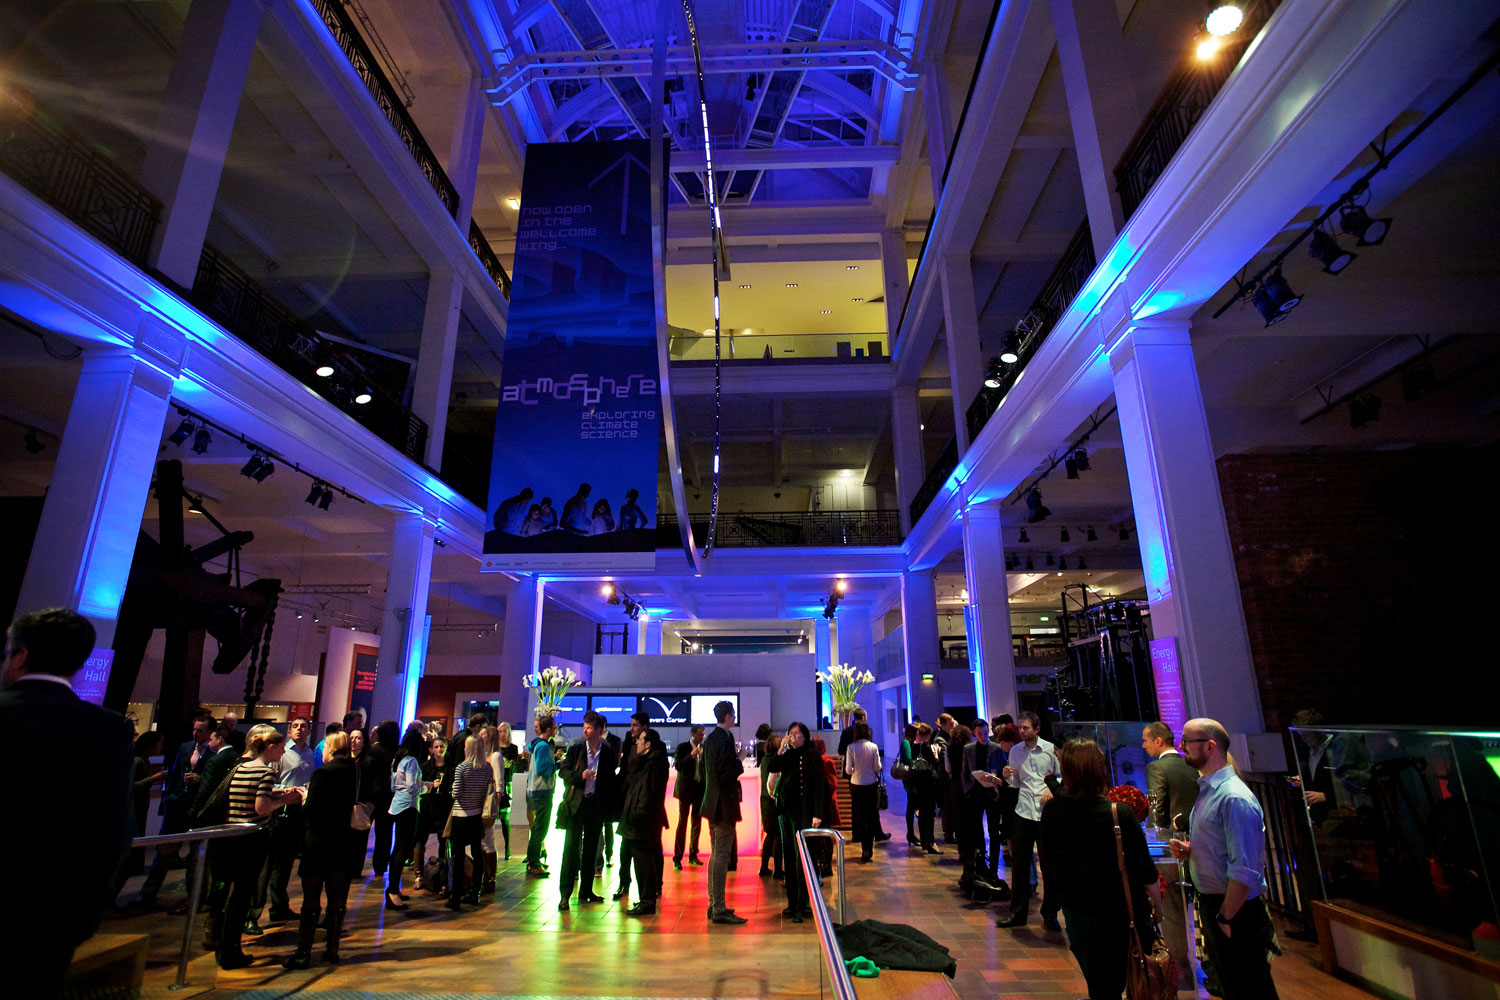 Evening event guests mingle in the Energy Hall